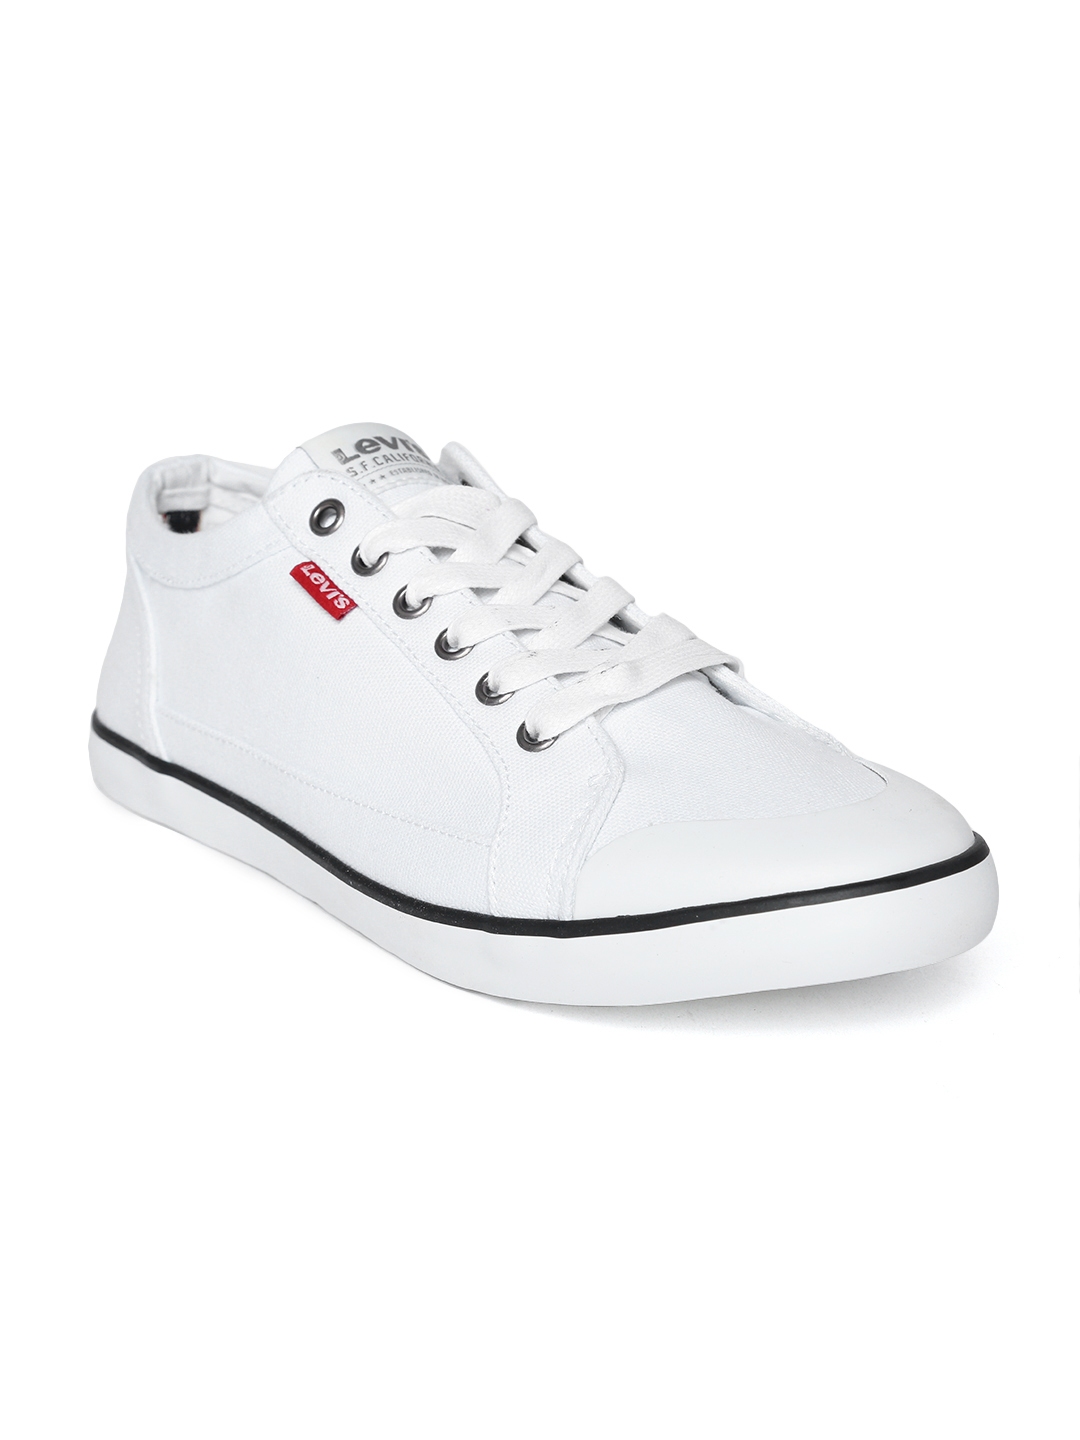 Buy Levis Men White Sneakers - Casual Shoes for Men 1813379 | Myntra